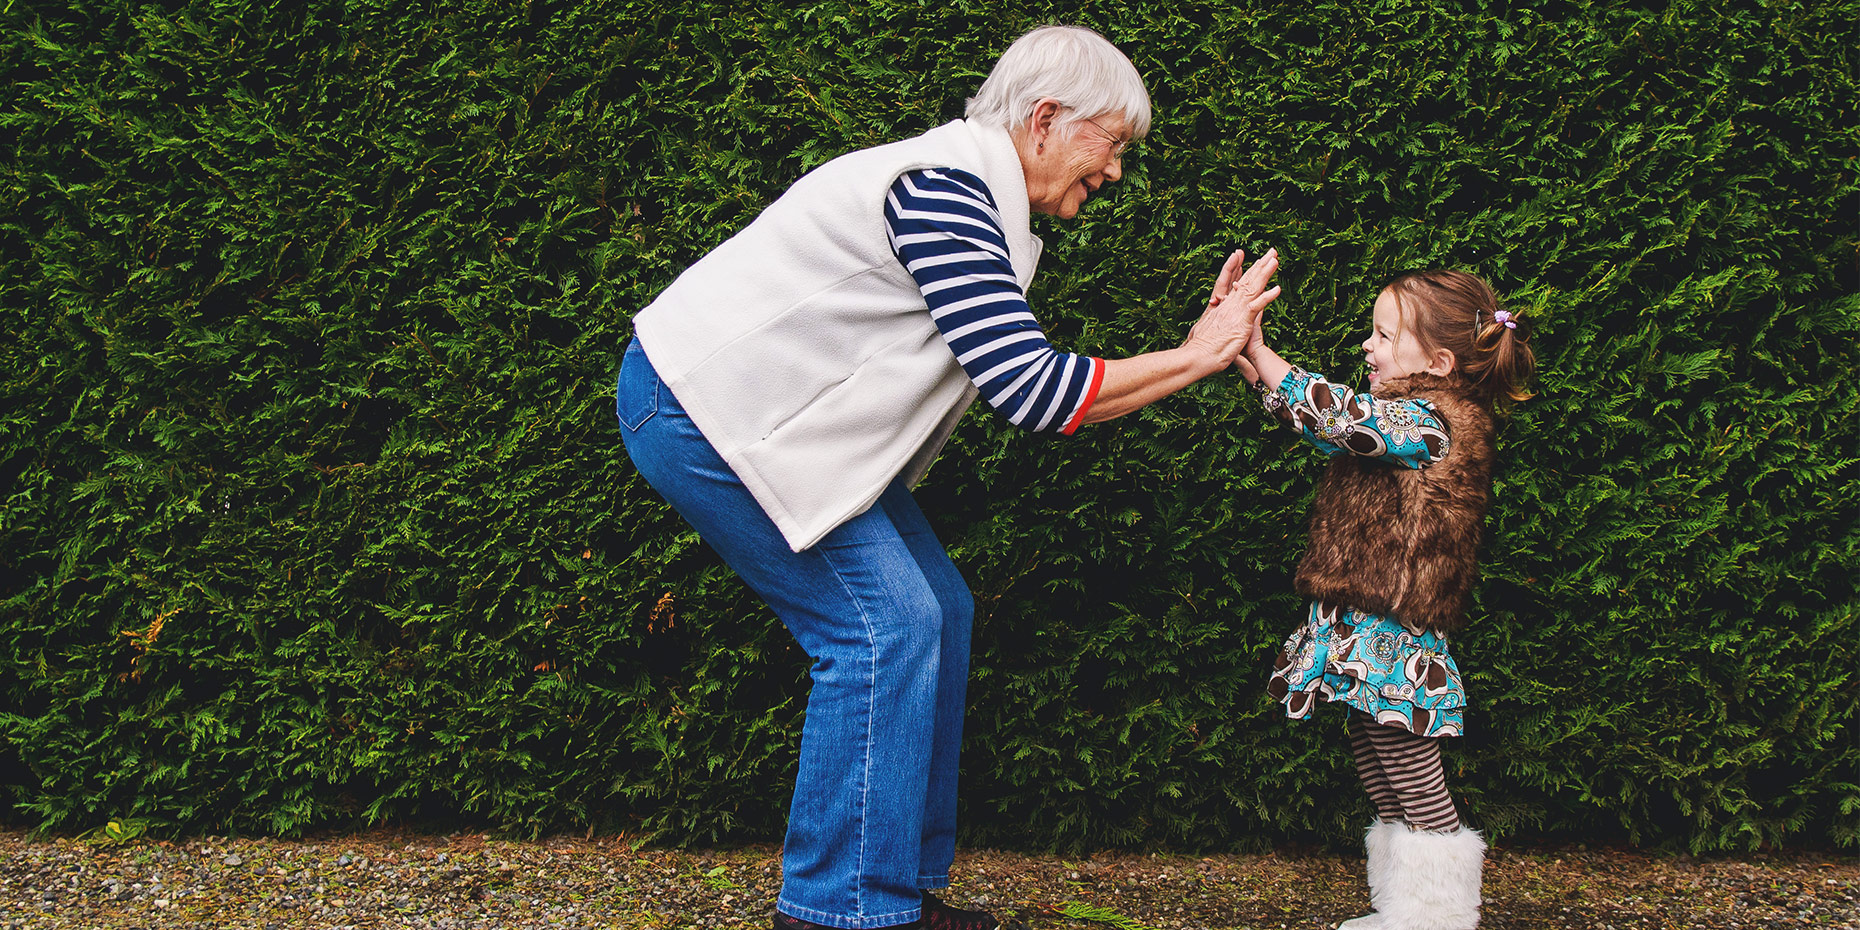 Grandmother high fiving a small child both smiling